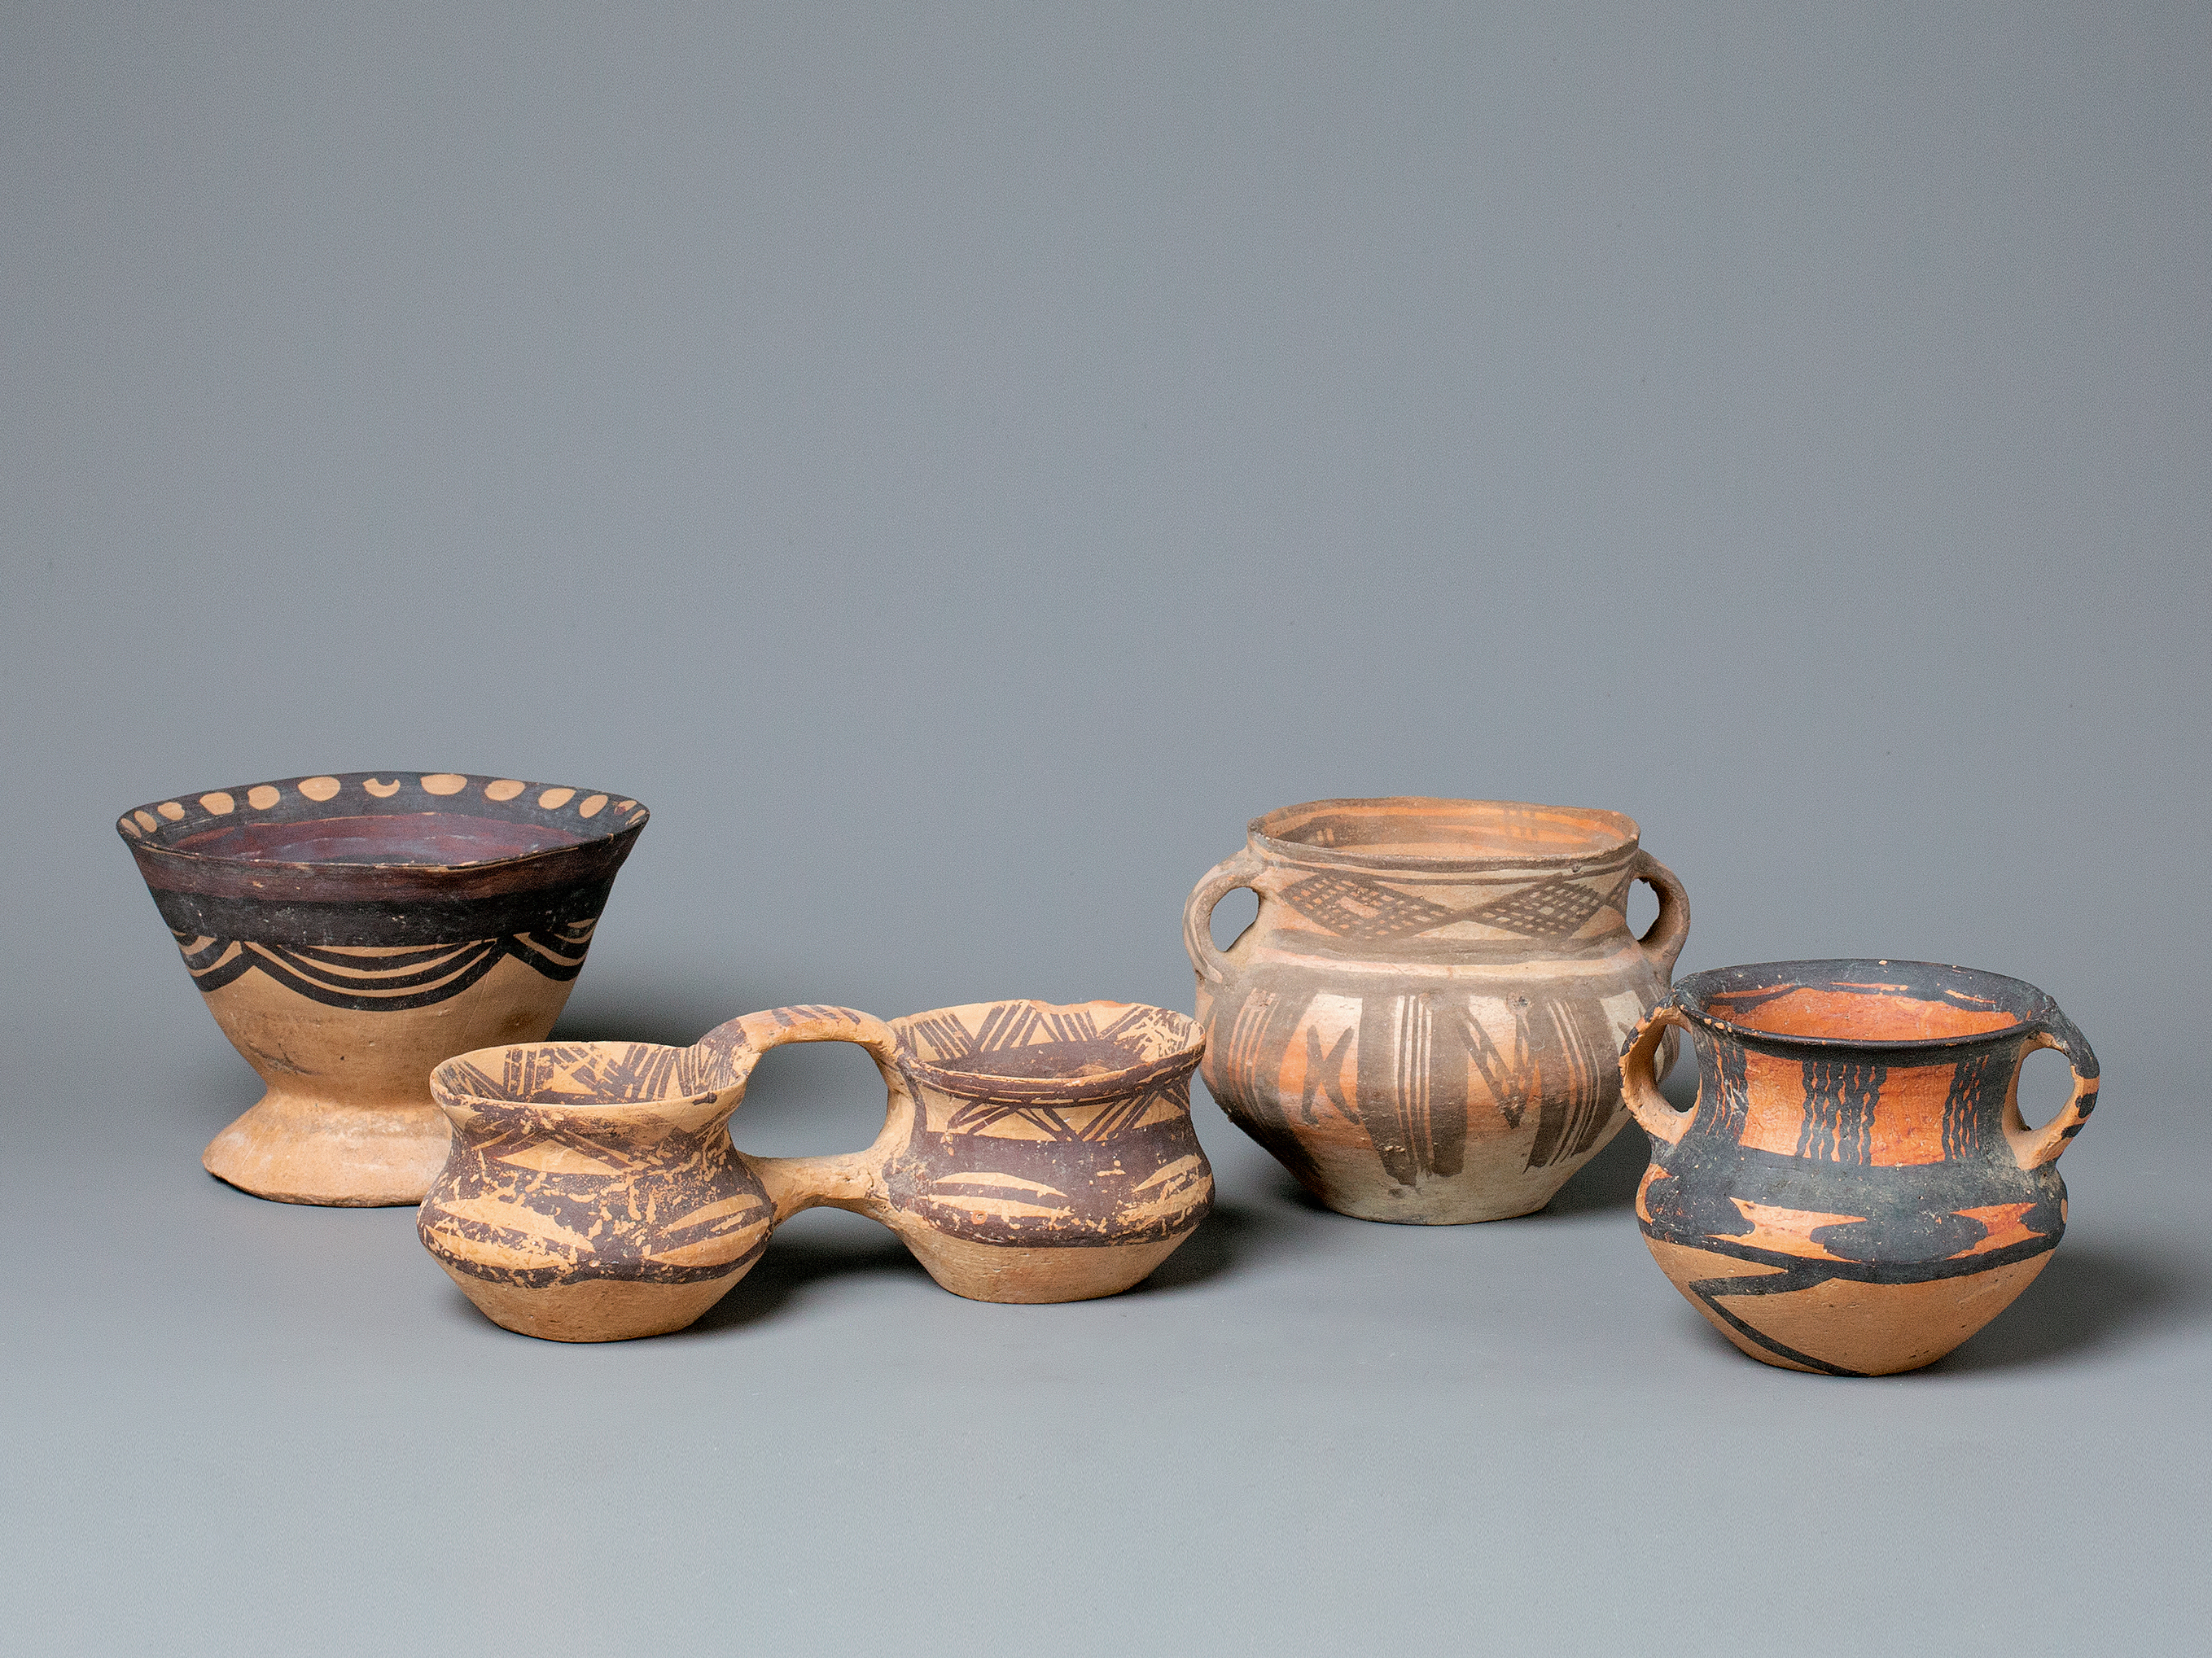 A Group Of Machang-Type Painted Pottery Ware, Majiayao Culture And Qijia Culture